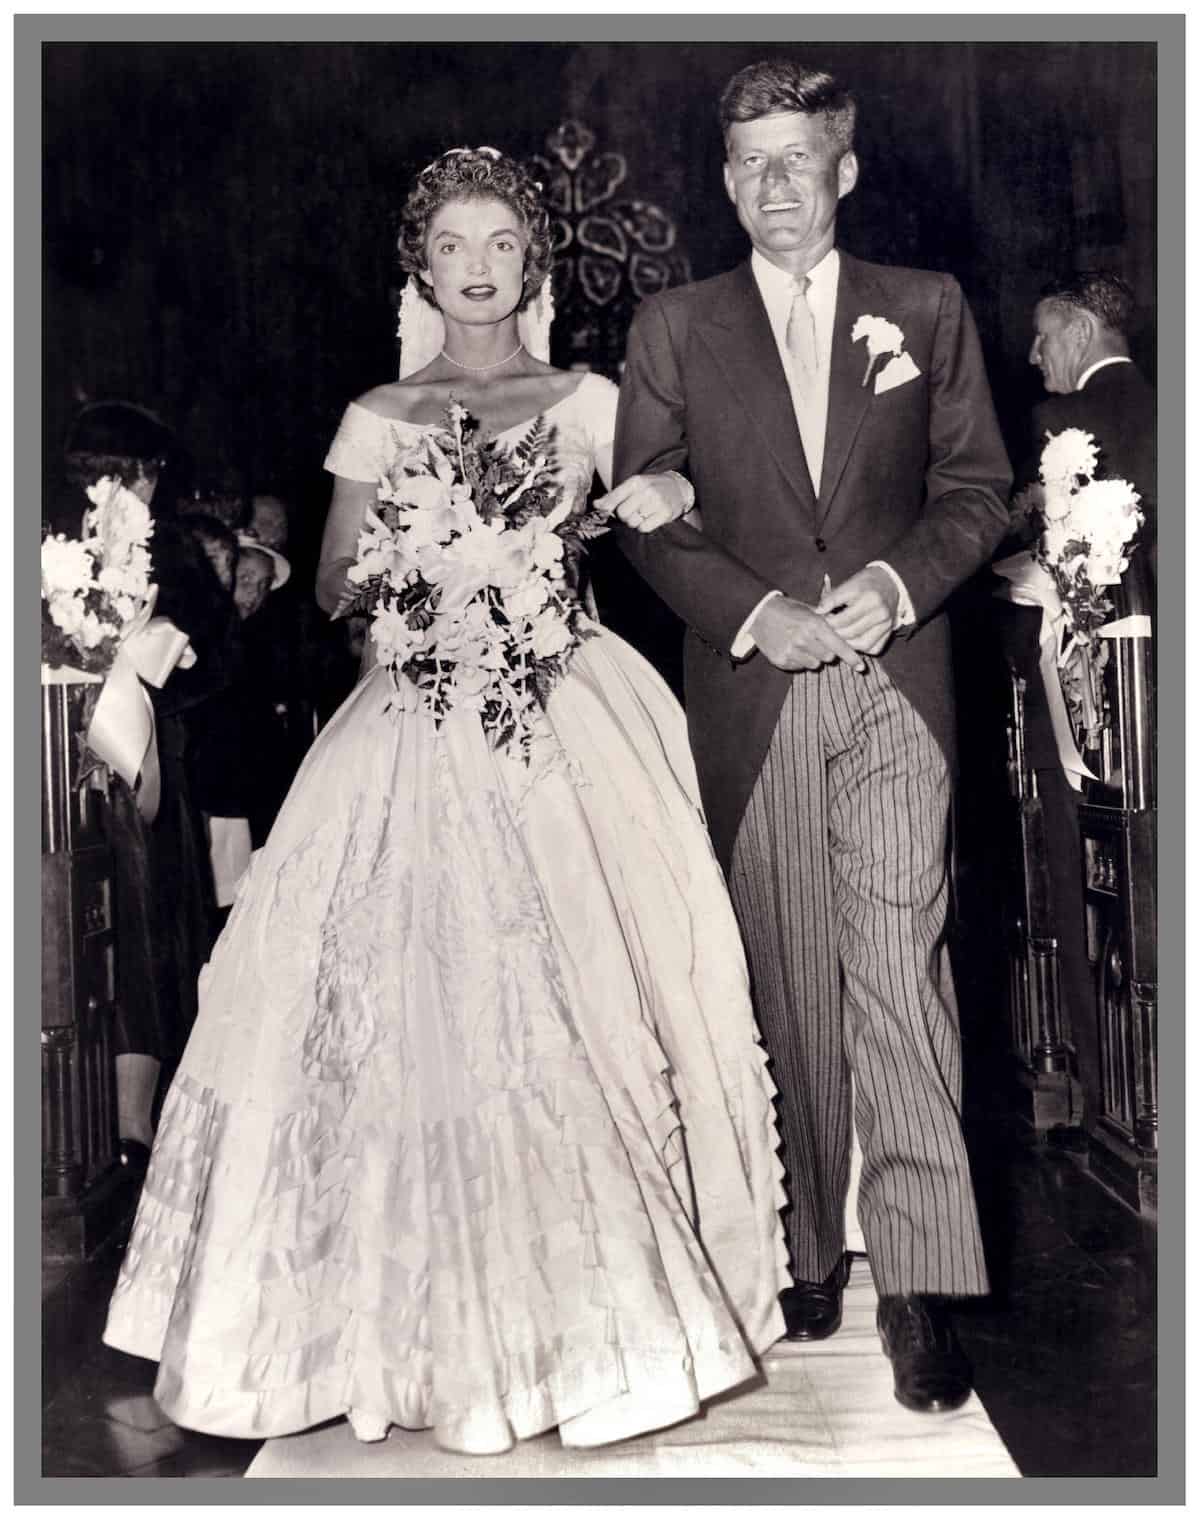 KP4JW2 JFK KENNEDY WEDDING 1953 Vintage B&W  image of the Jackie Kennedy marriage to J.F Kennedy in 1953 Sept 12th.St. Marys Church Newport in a dress made by New York dressmaker Ann Lowe.